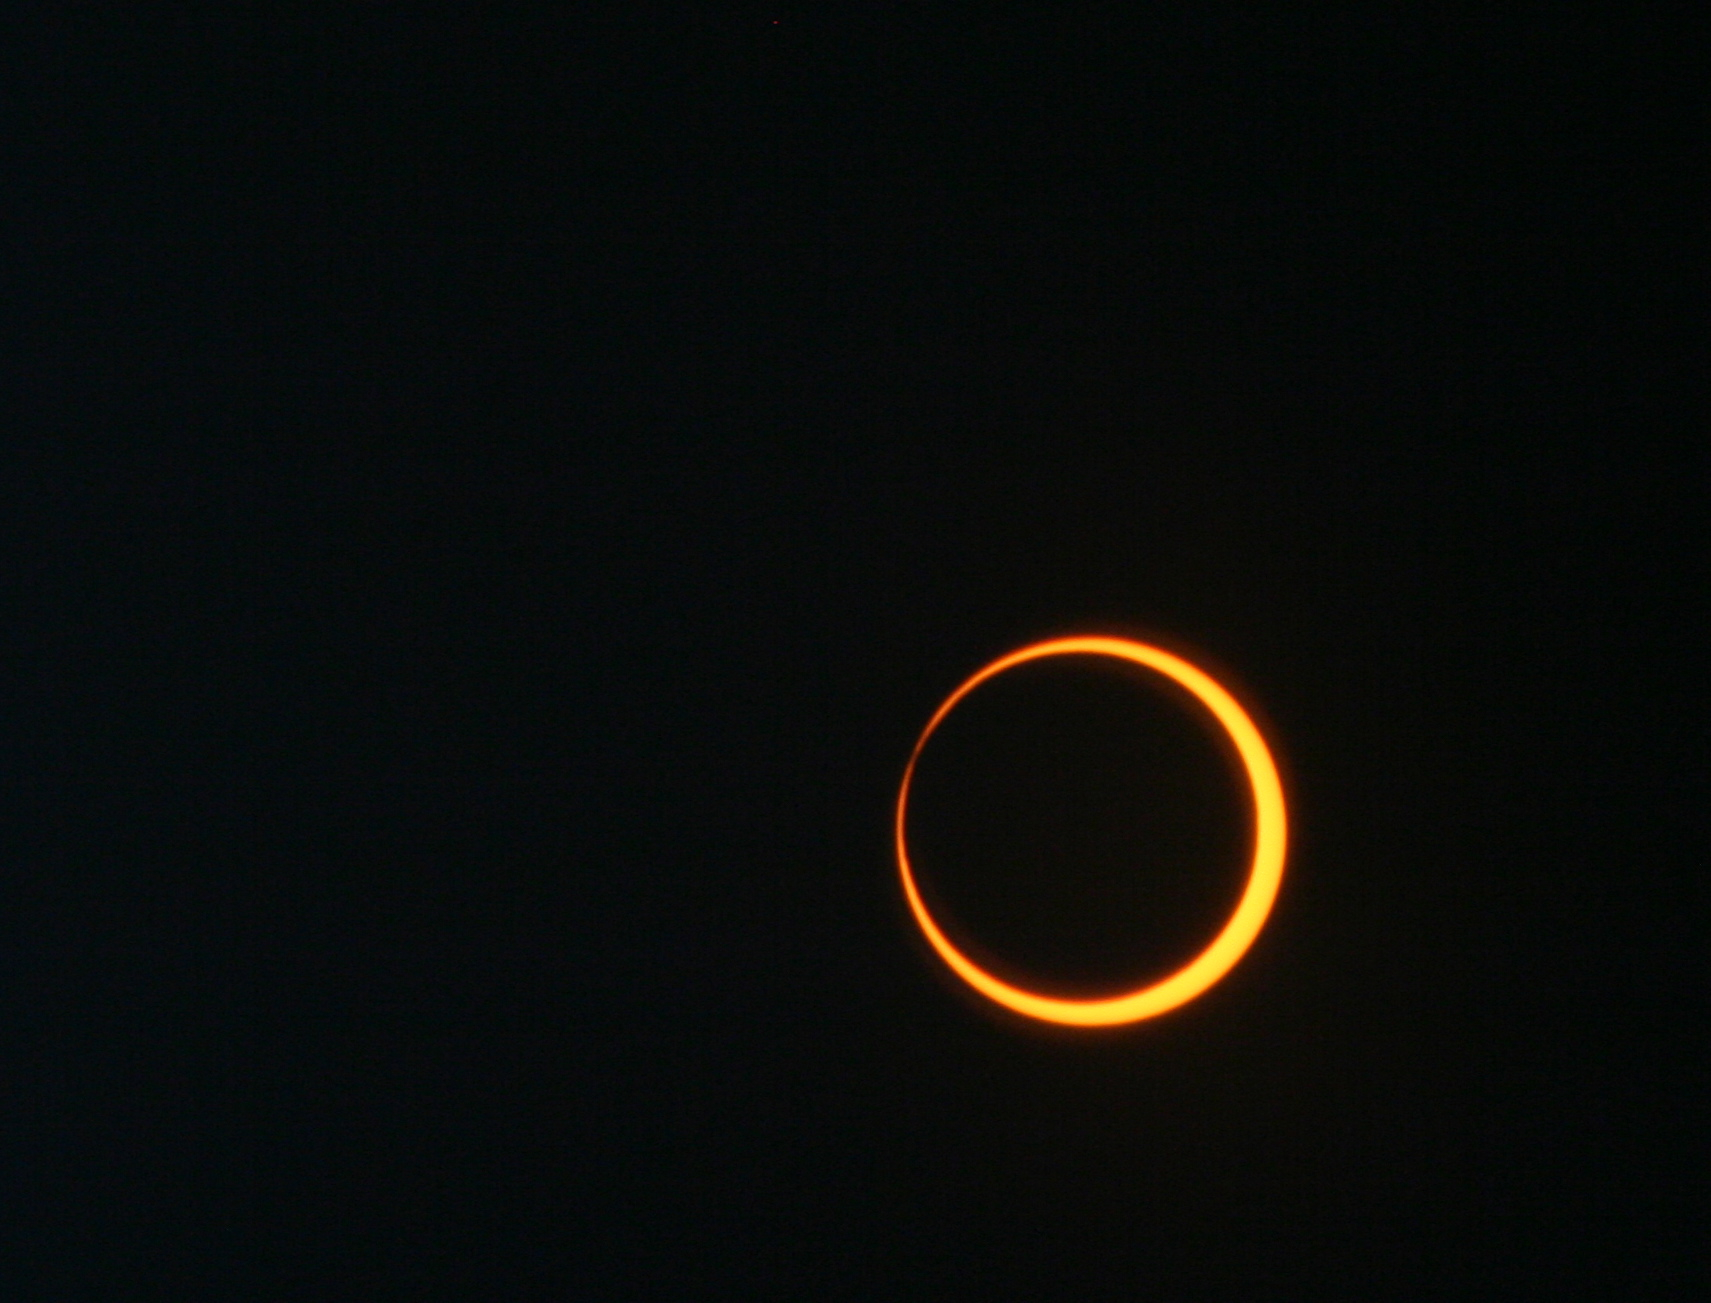 A thin ring of yellow against a black background